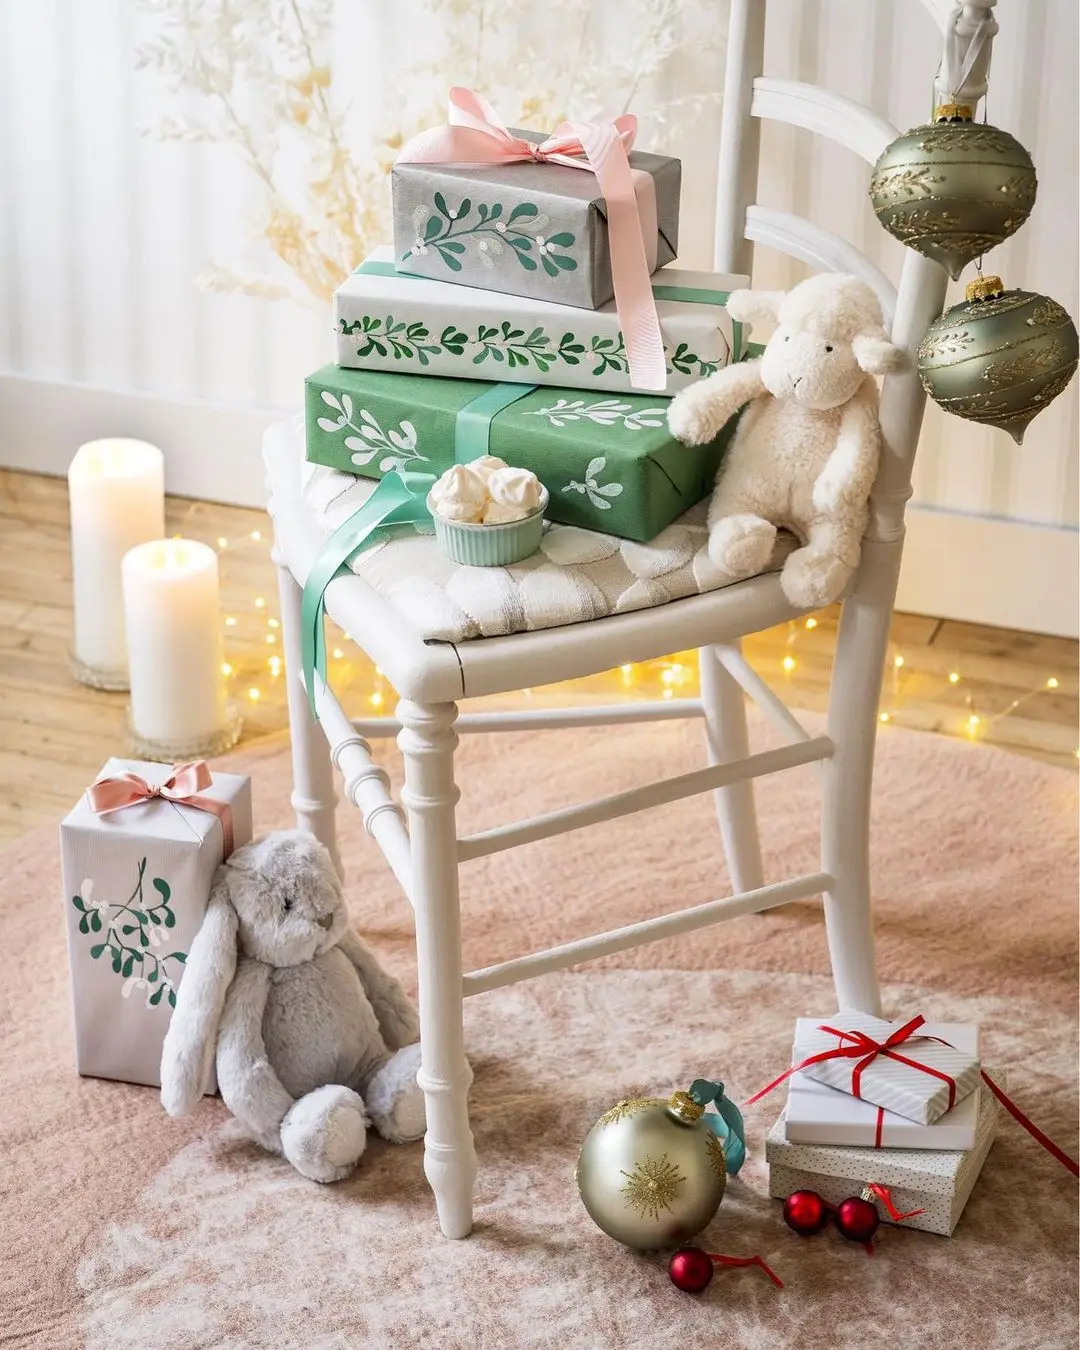 Printables That Will Make You Wish It Was Christmas Every Day ...